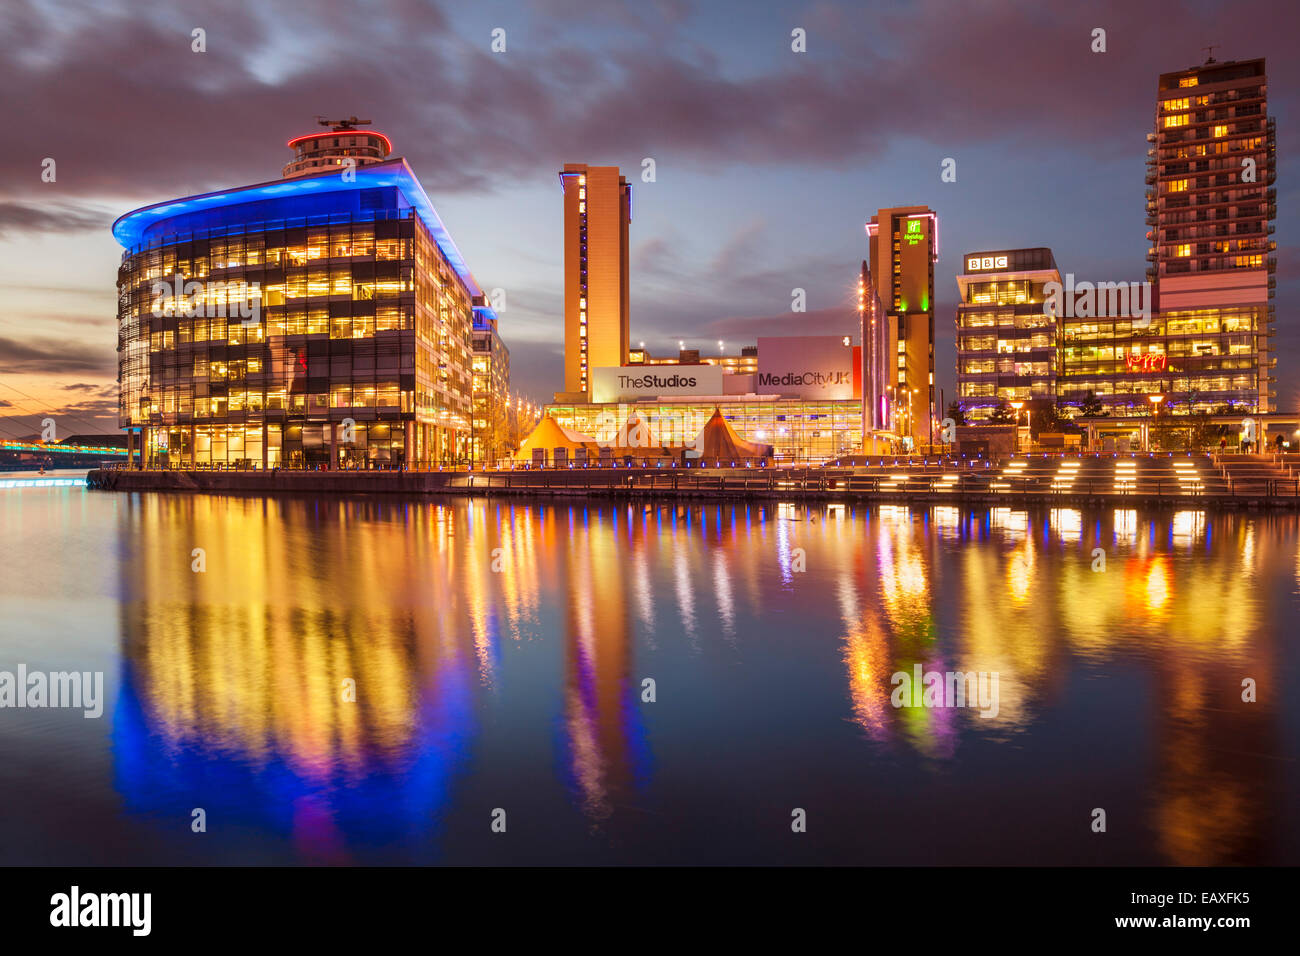 Media City UK Salford Quays Manchester Greater Manchester Ville England UK GB EU Europe Banque D'Images